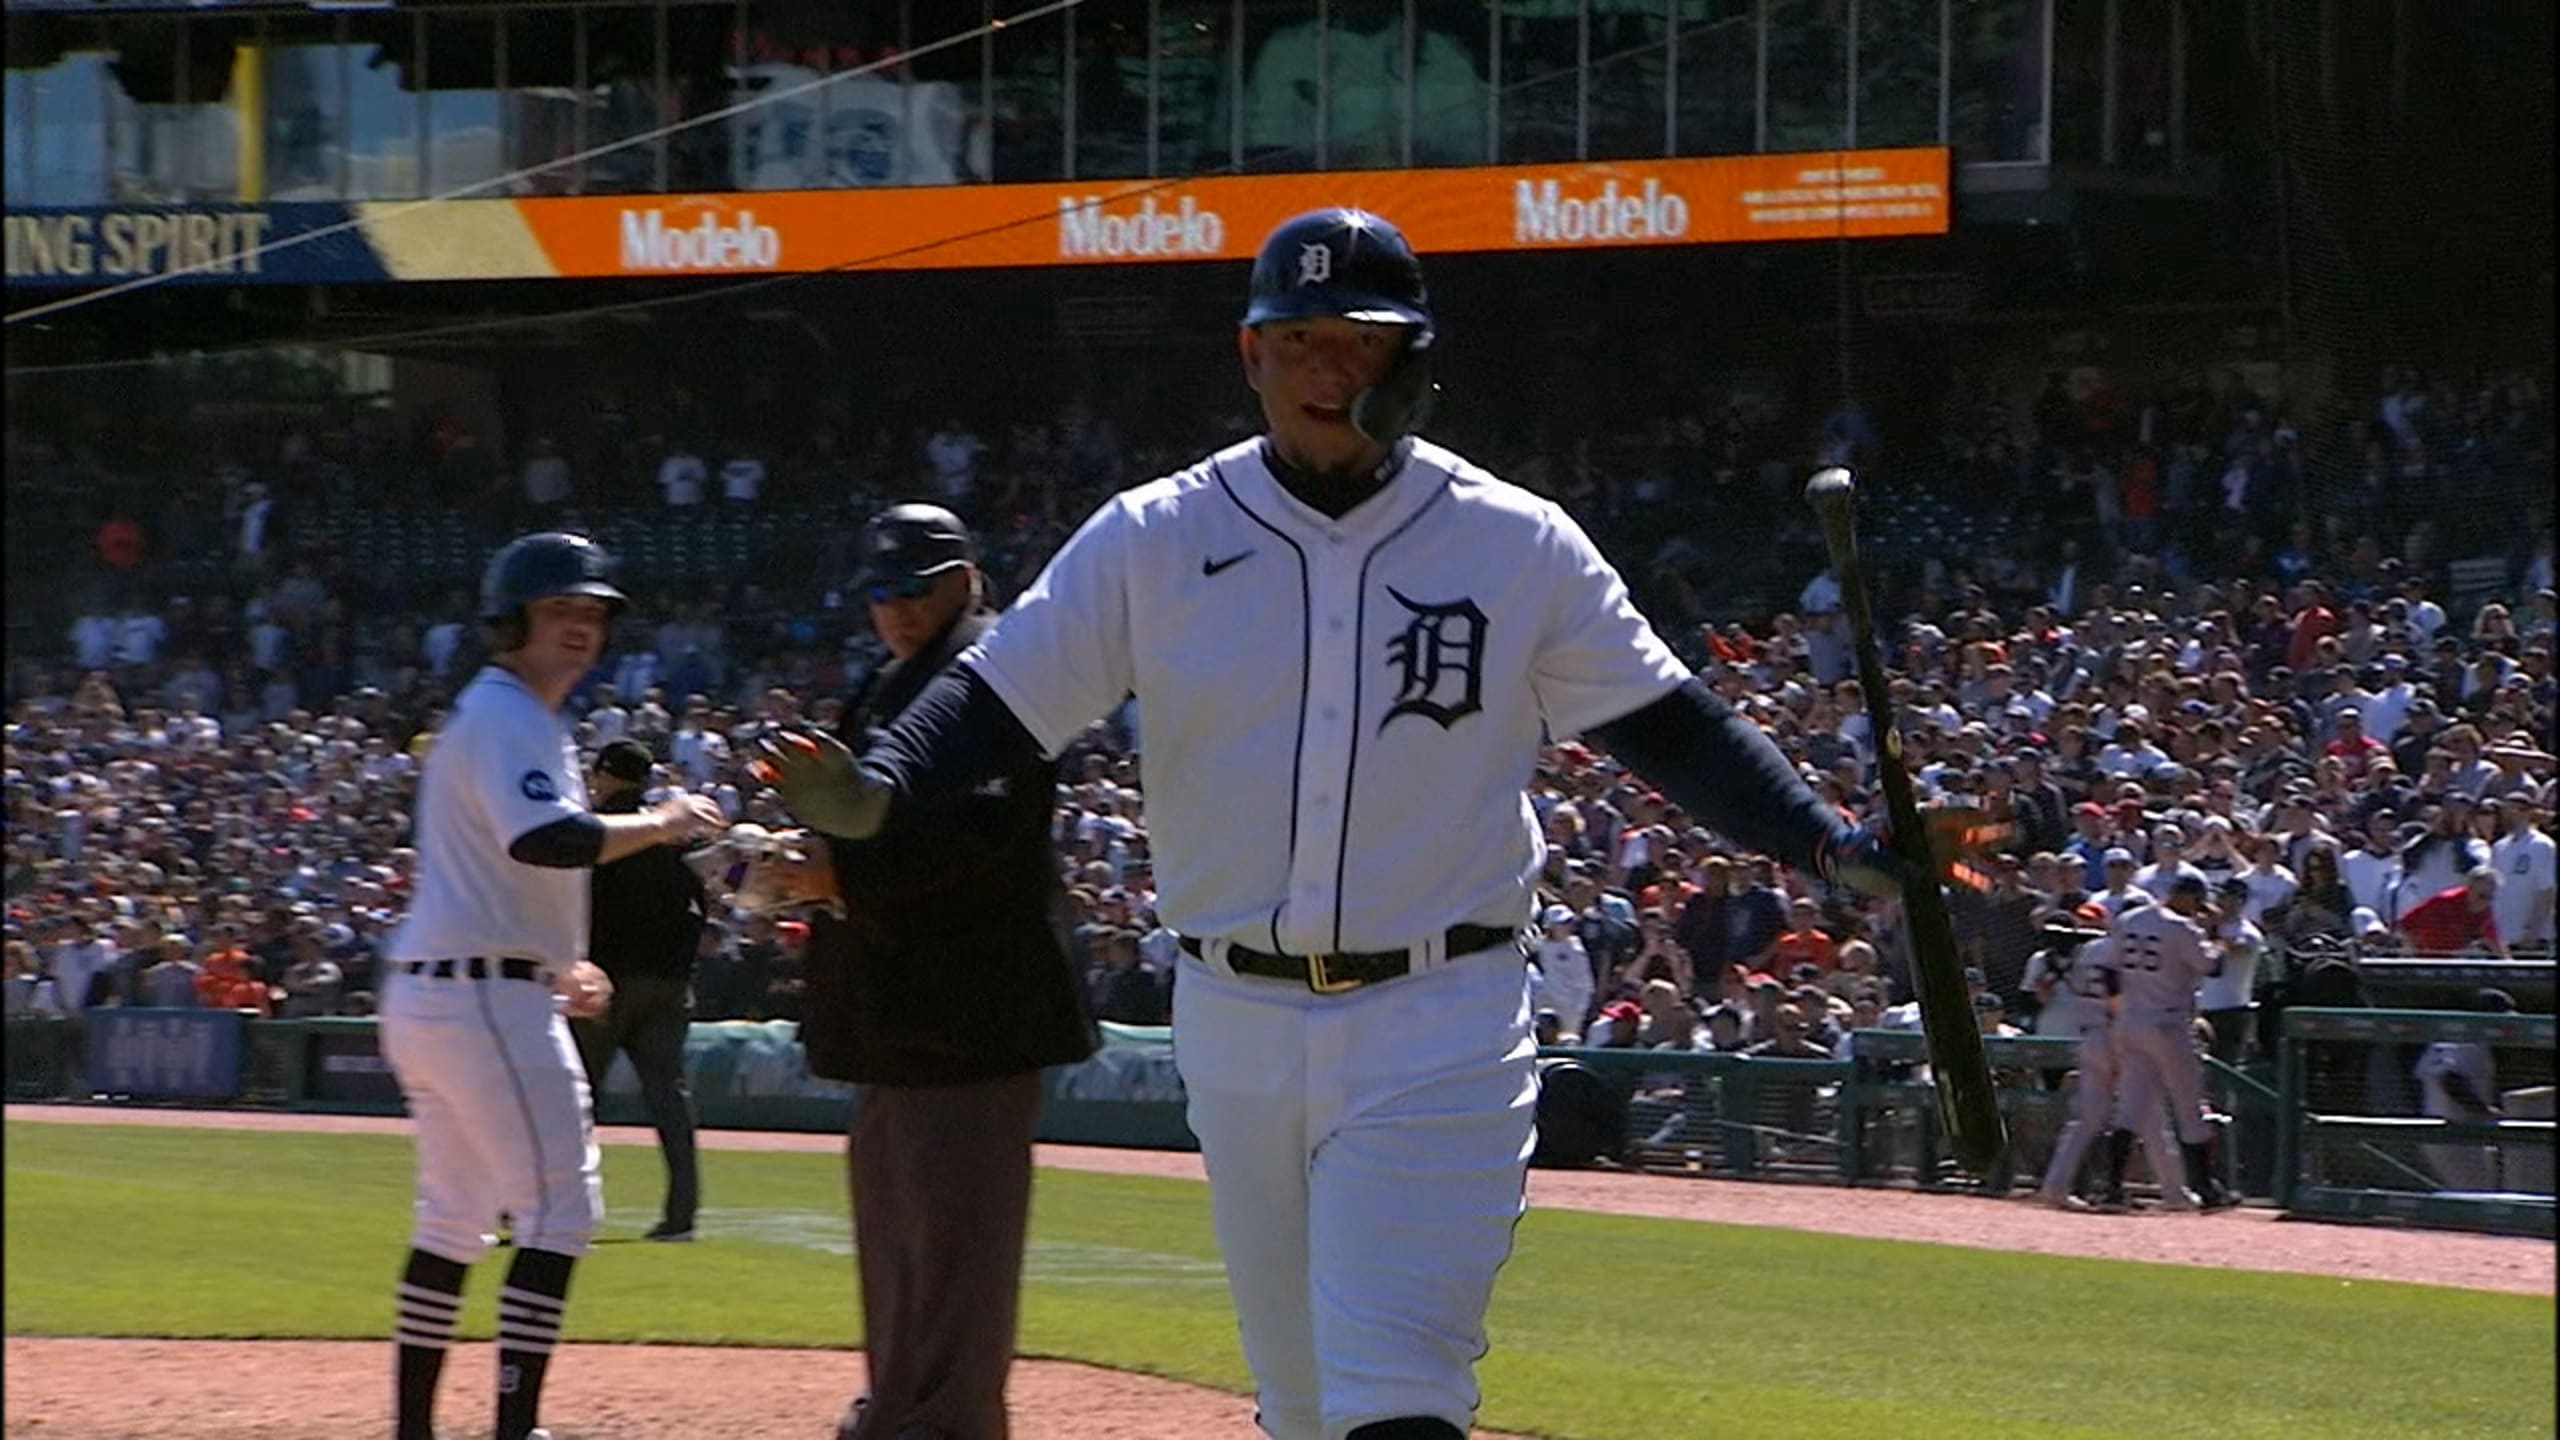 Tigers, Cabrera Team Up for Game Used Deal En Route to Twin Milestones